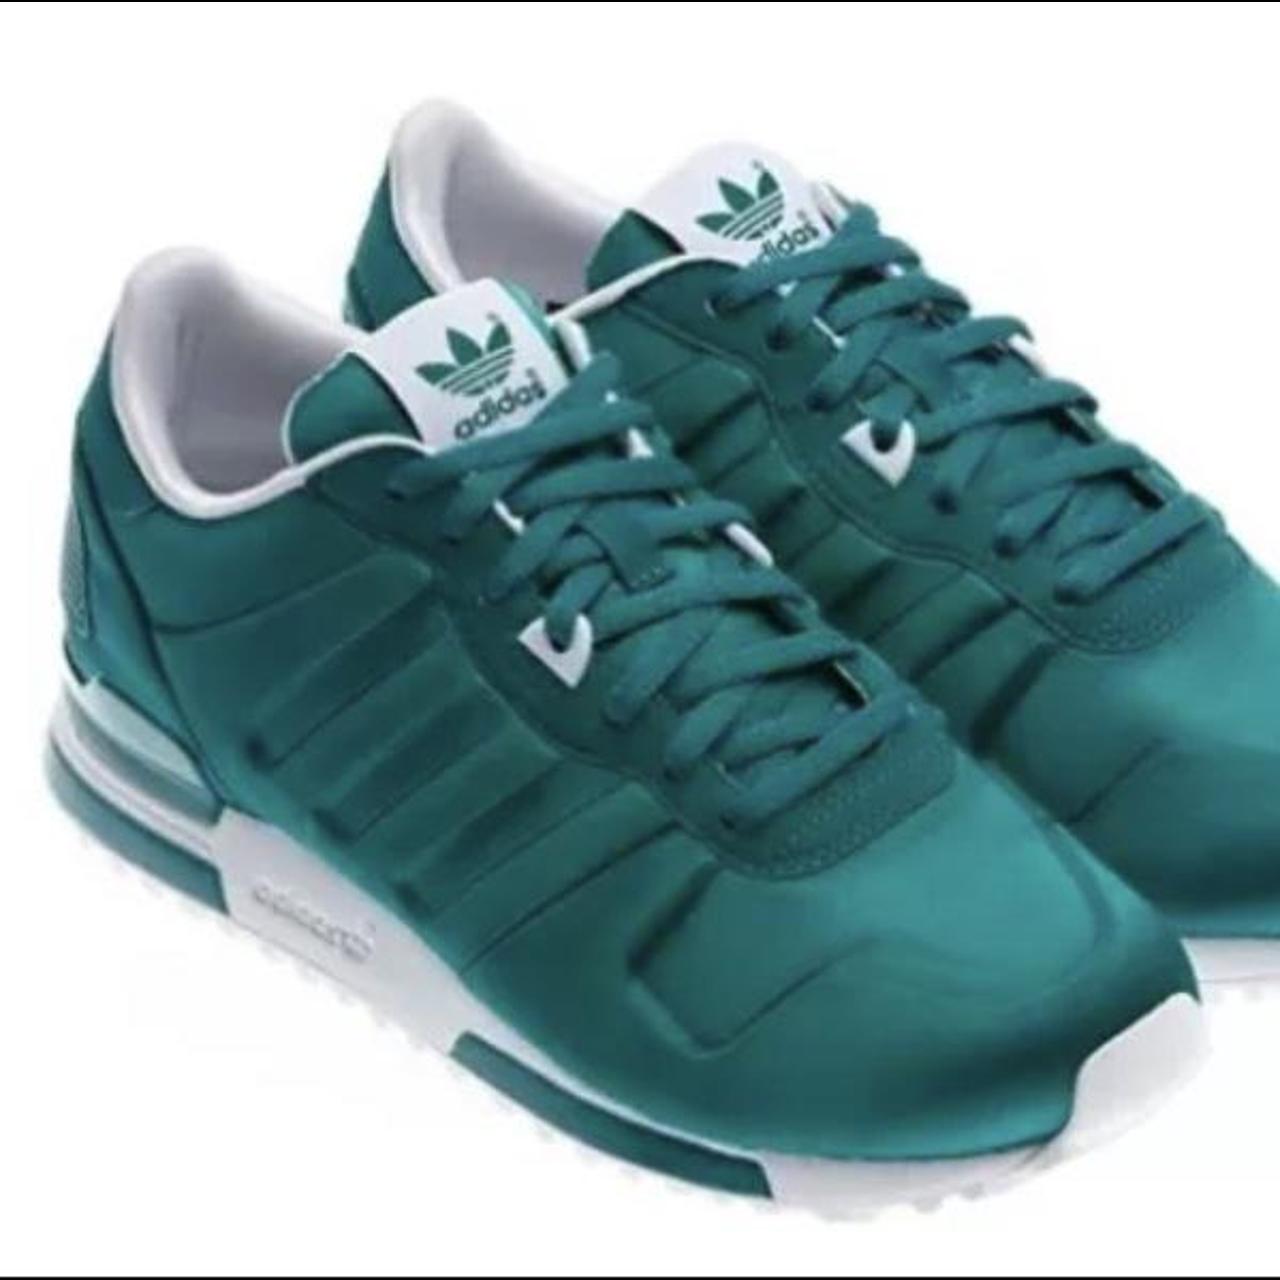 Vintage Adidas ZX 700 Shoes G95957 jade green